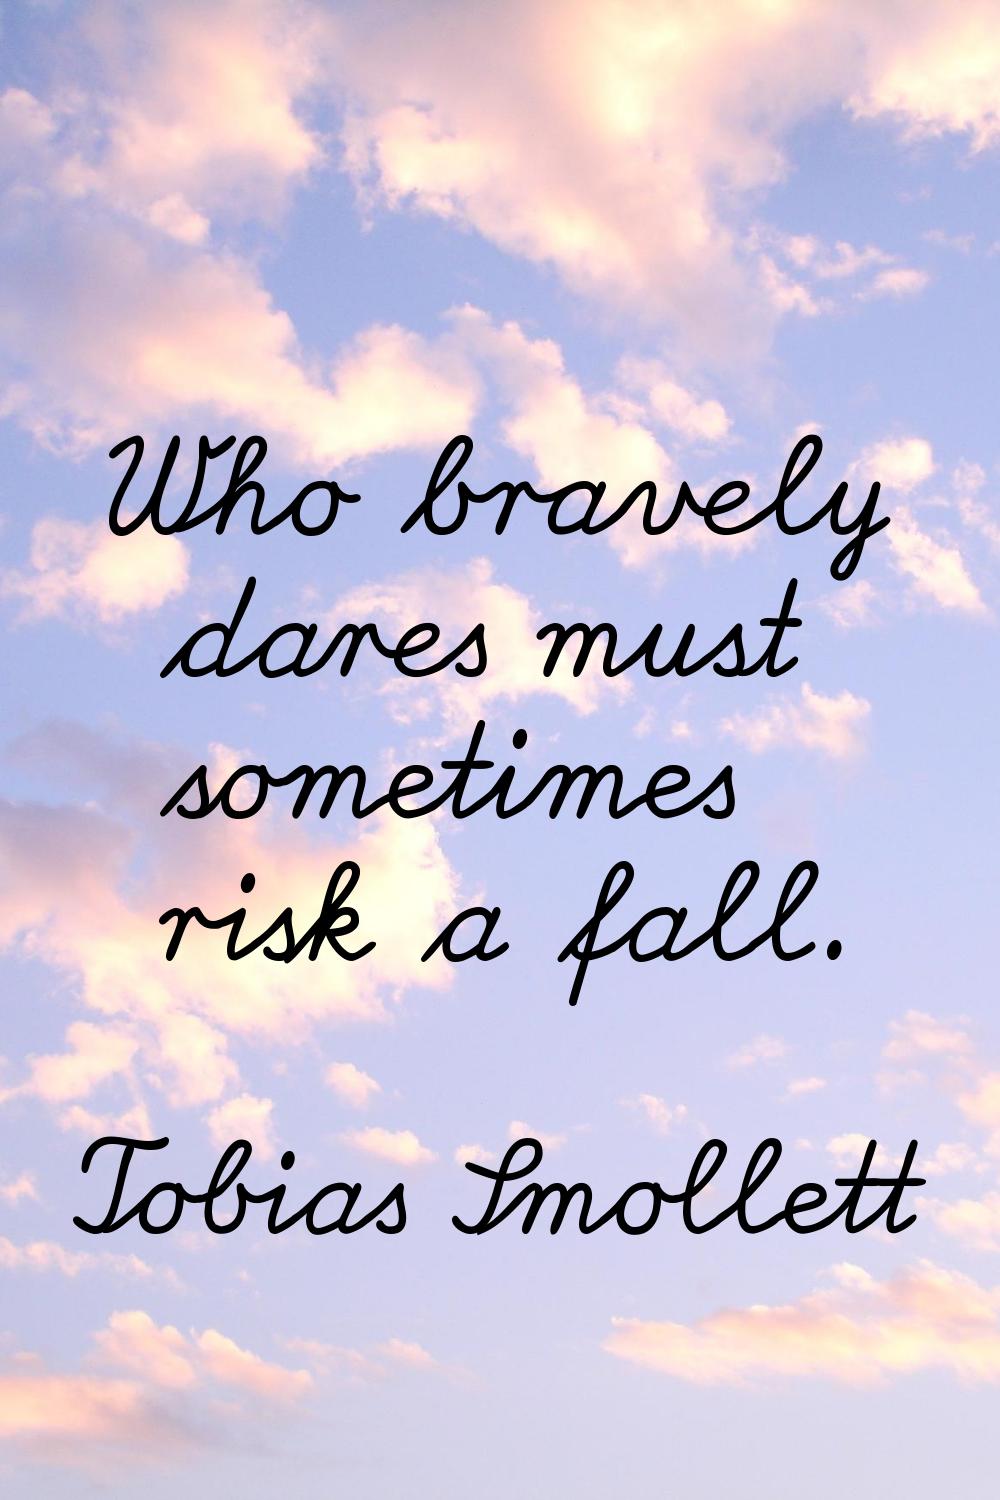 Who bravely dares must sometimes risk a fall.